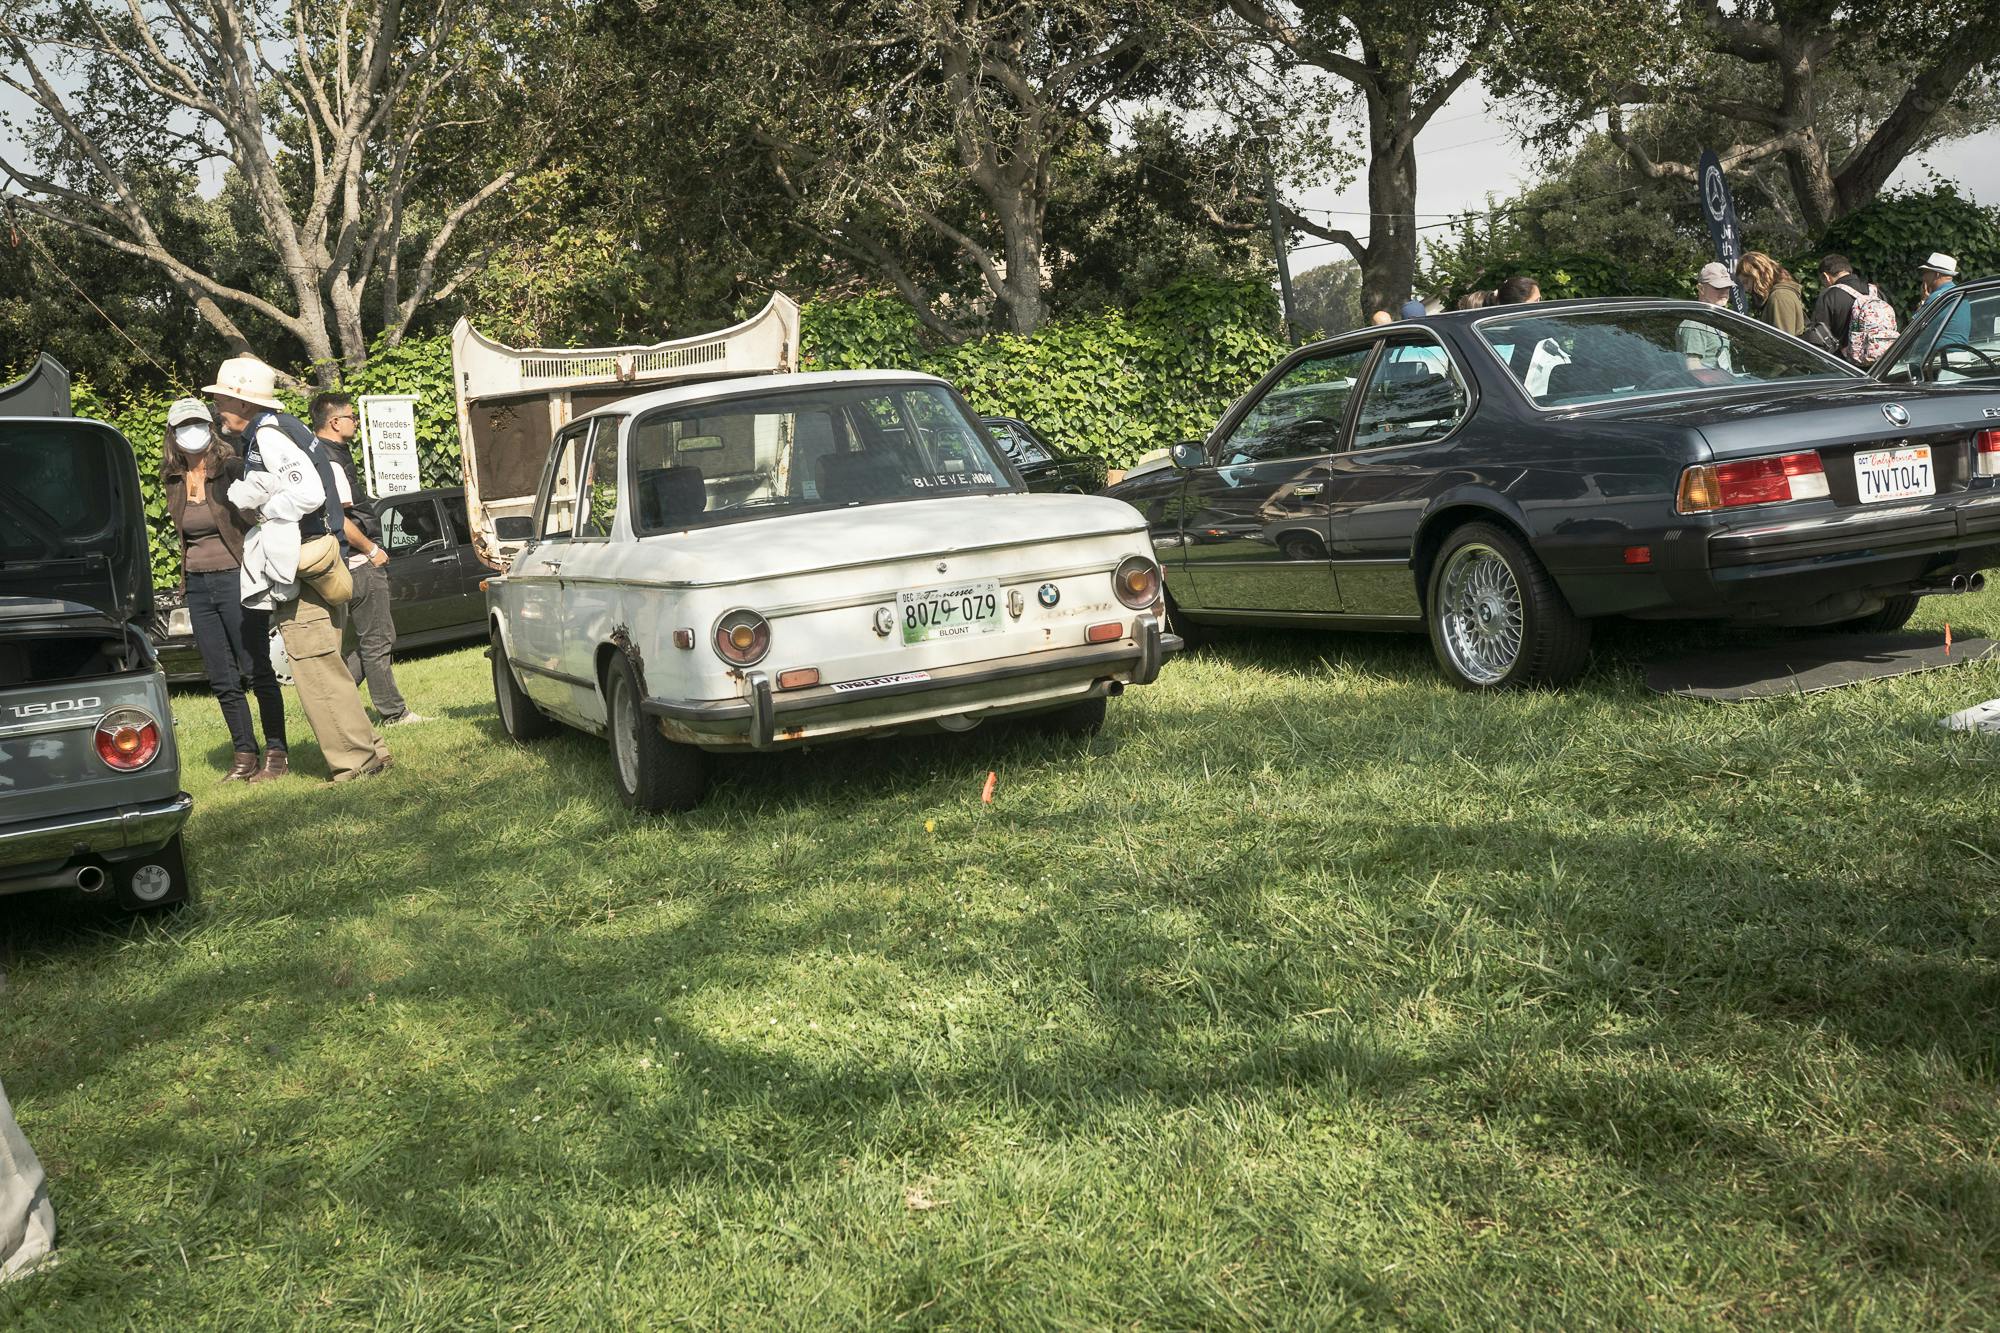 BMW 2002 parked on lawn